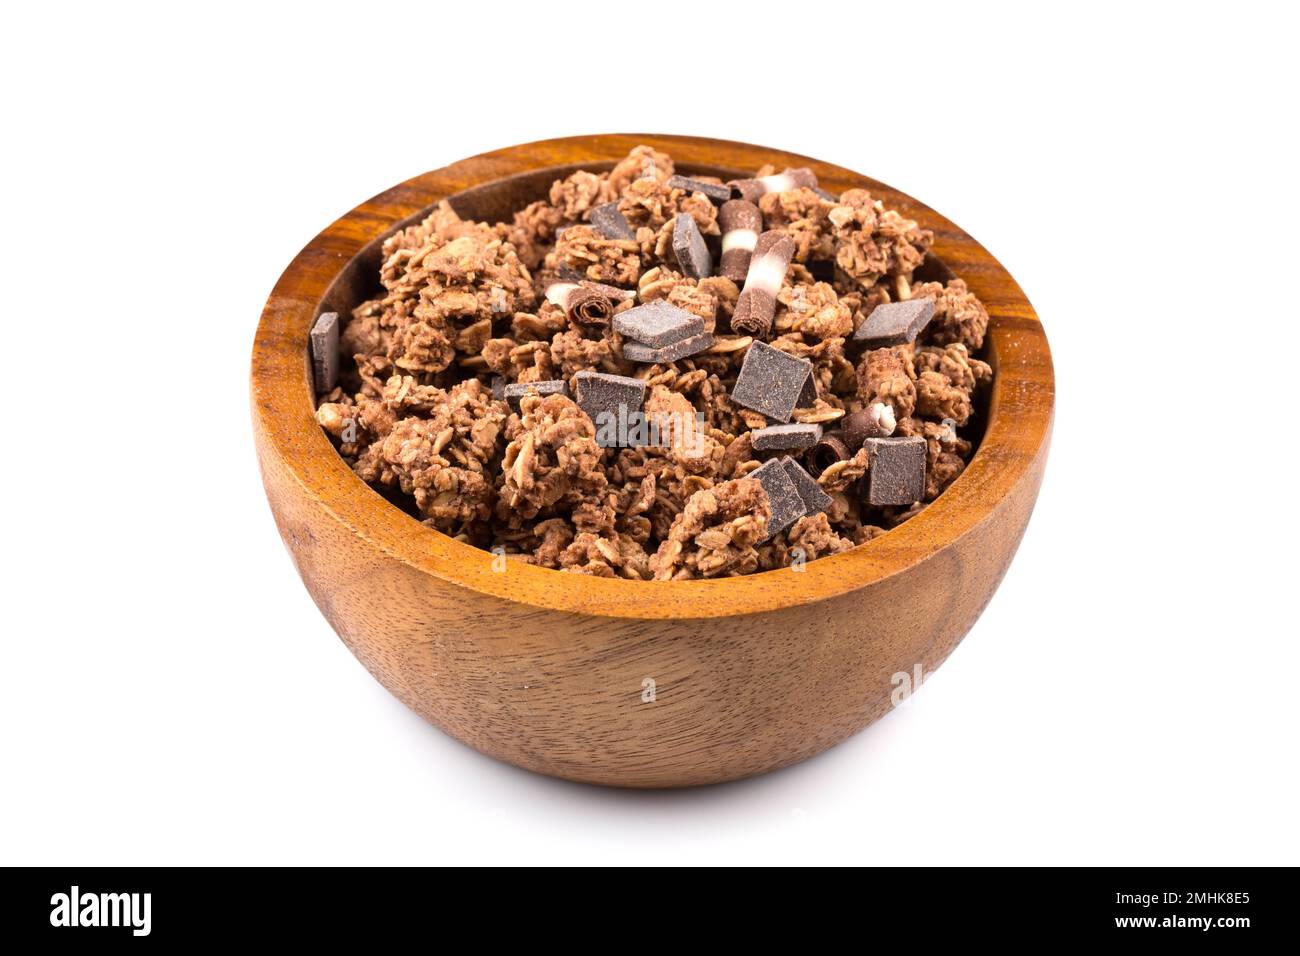 Close up of chocolate muesli with pieces of chocolate in a bowl on